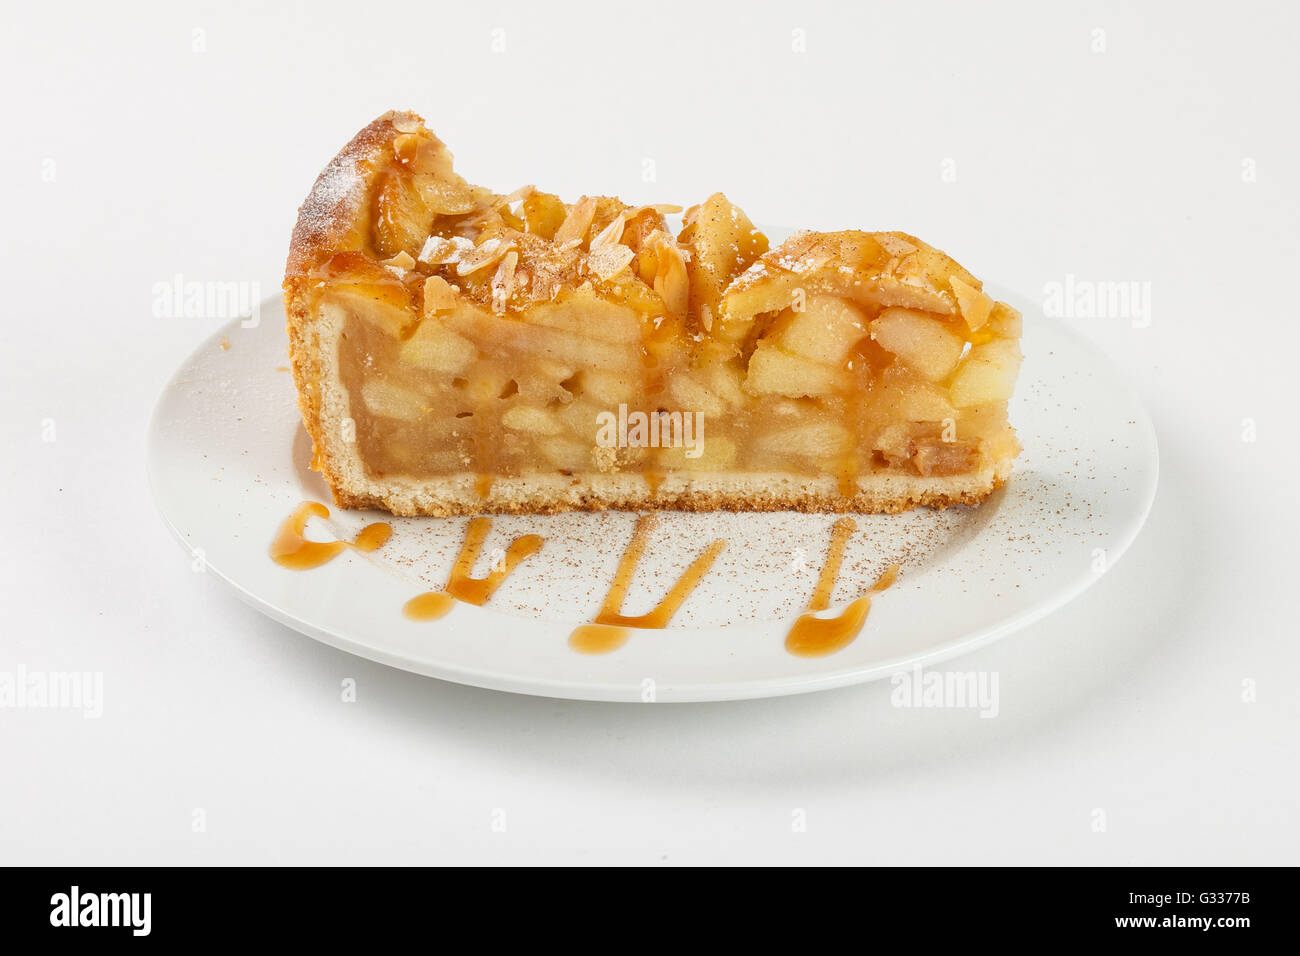 Delicious apple pie charlotte with caramel on the plate on white background. Close up side view. Stock Photo